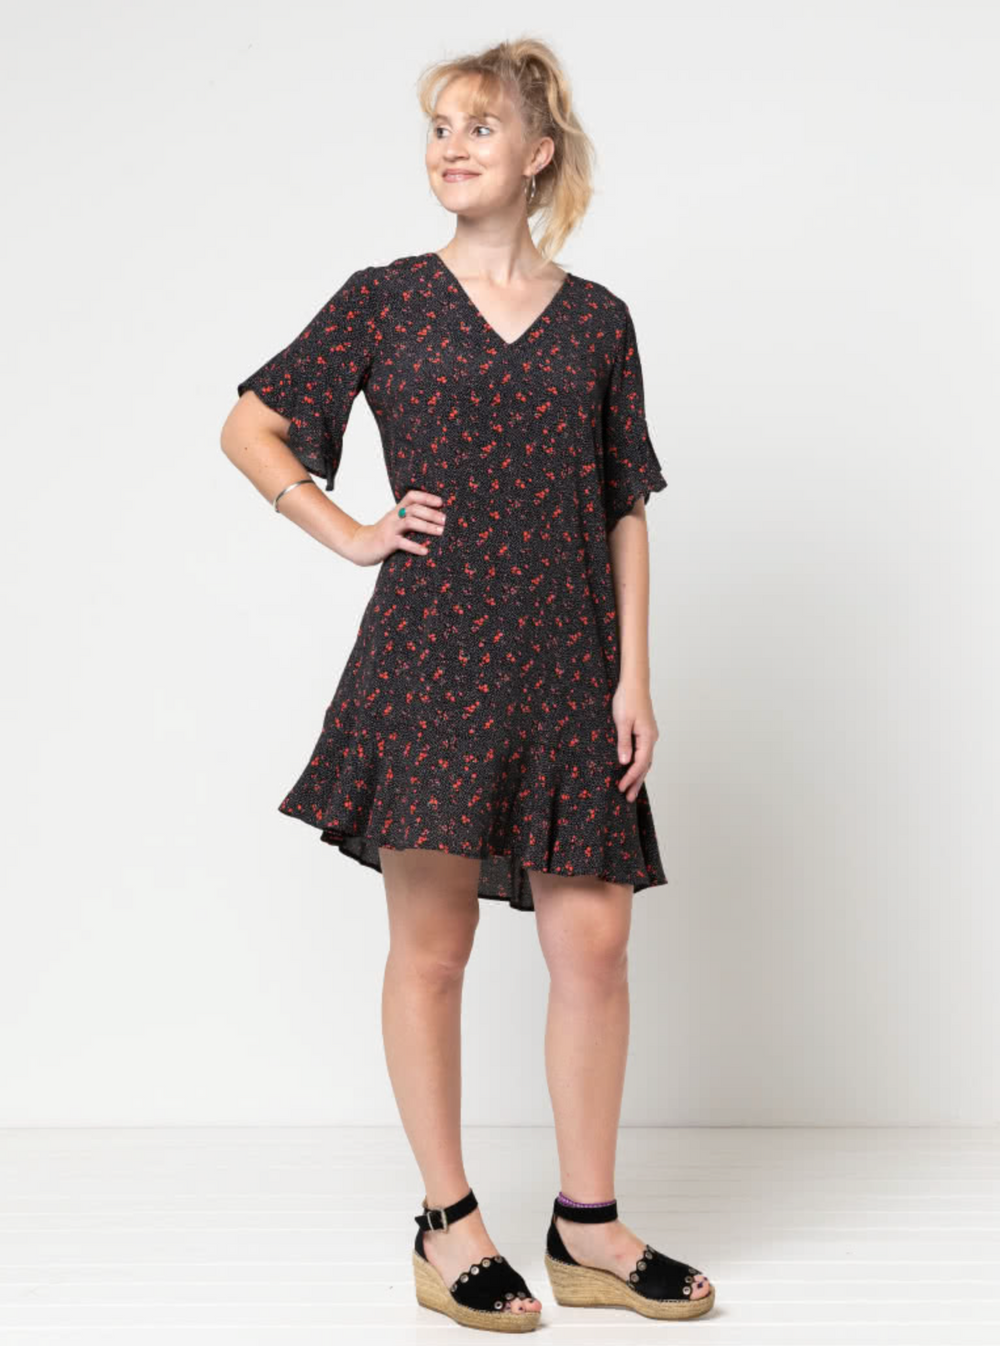 Woman wearing the Pixie Woven Dress sewing pattern from Style Arc on The Fold Line. A knee length dress pattern made in rayon, crepe, or silk fabric, featuring a slight A-line shape, V-neck, bust darts, short sleeves with flounces and a hem flounce.